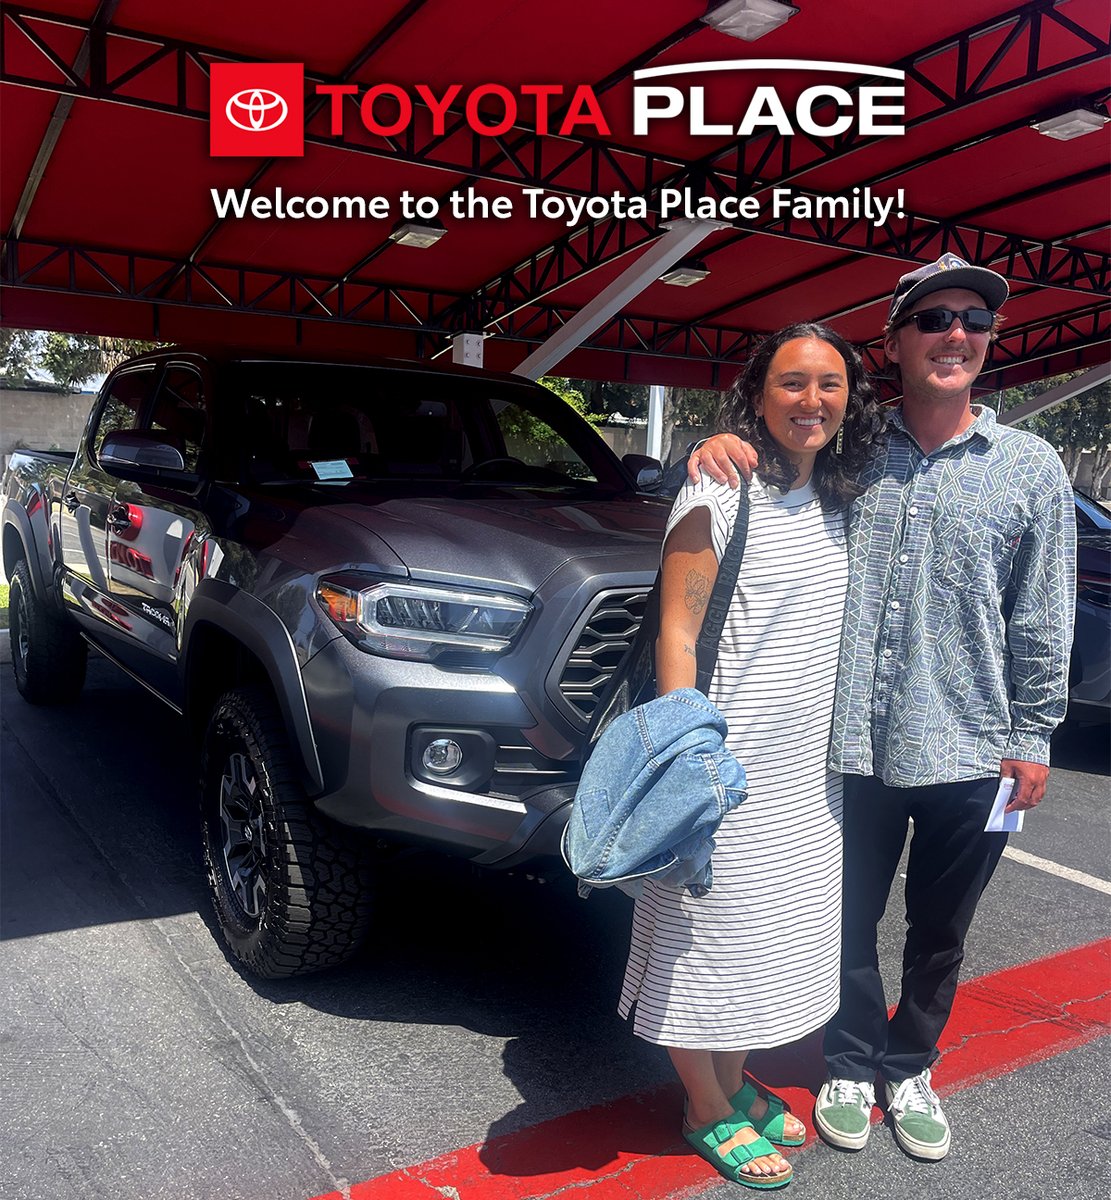 🎉🎉 Congratulations on your ❤️beautiful ❤️pre-owned Toyota 😍Tacoma. 🤗Thank you for choosing 😊Toyota Place in 🌴Orange County. We wish you many awesome 🌄adventures going places in your ❤️pre-owned Toyota #tacoma truck. #toyotaplace #usedcarsforsale